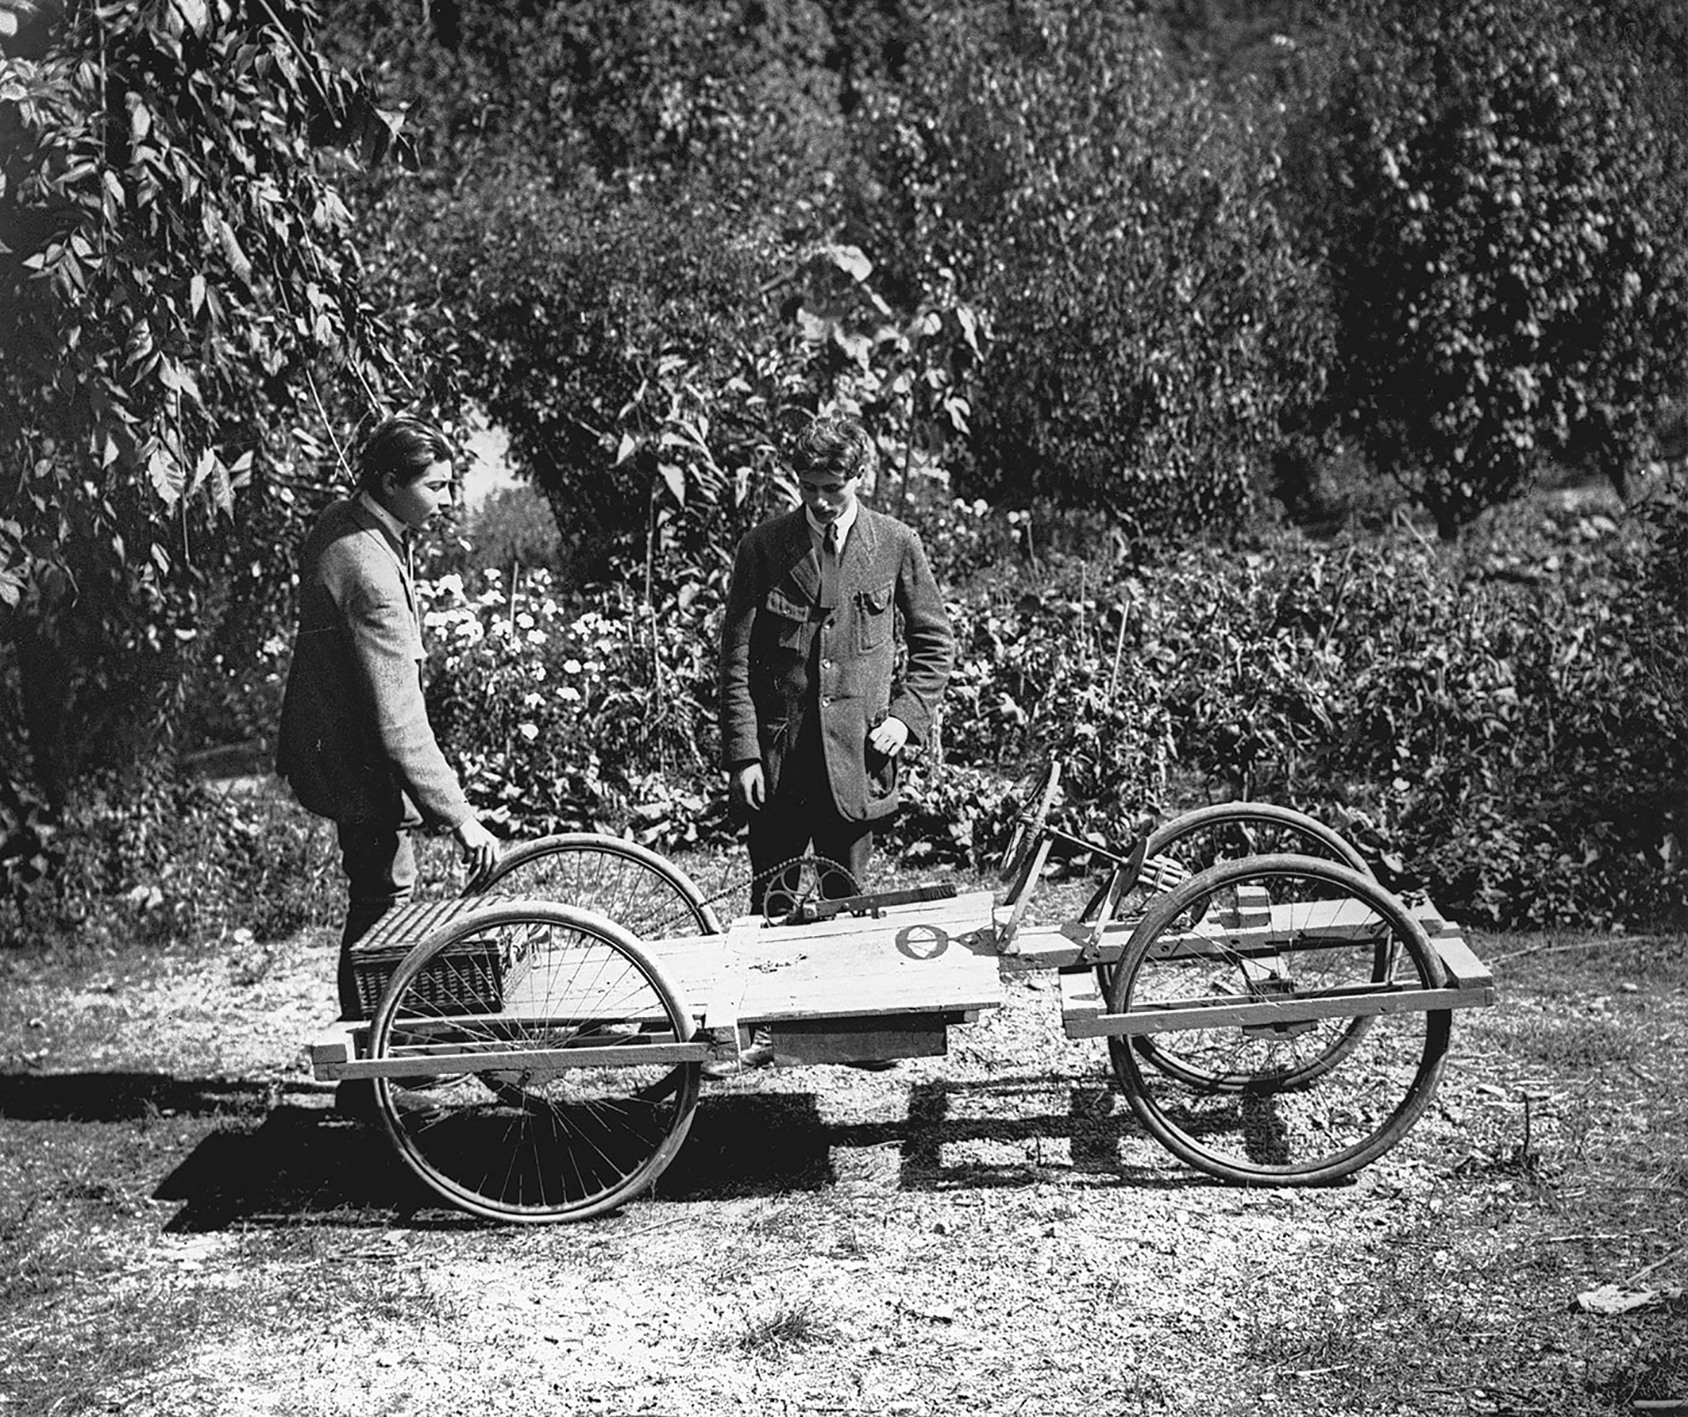 Jean Prouvé and his brother Vic studying a quadricycle, ca. 1918.